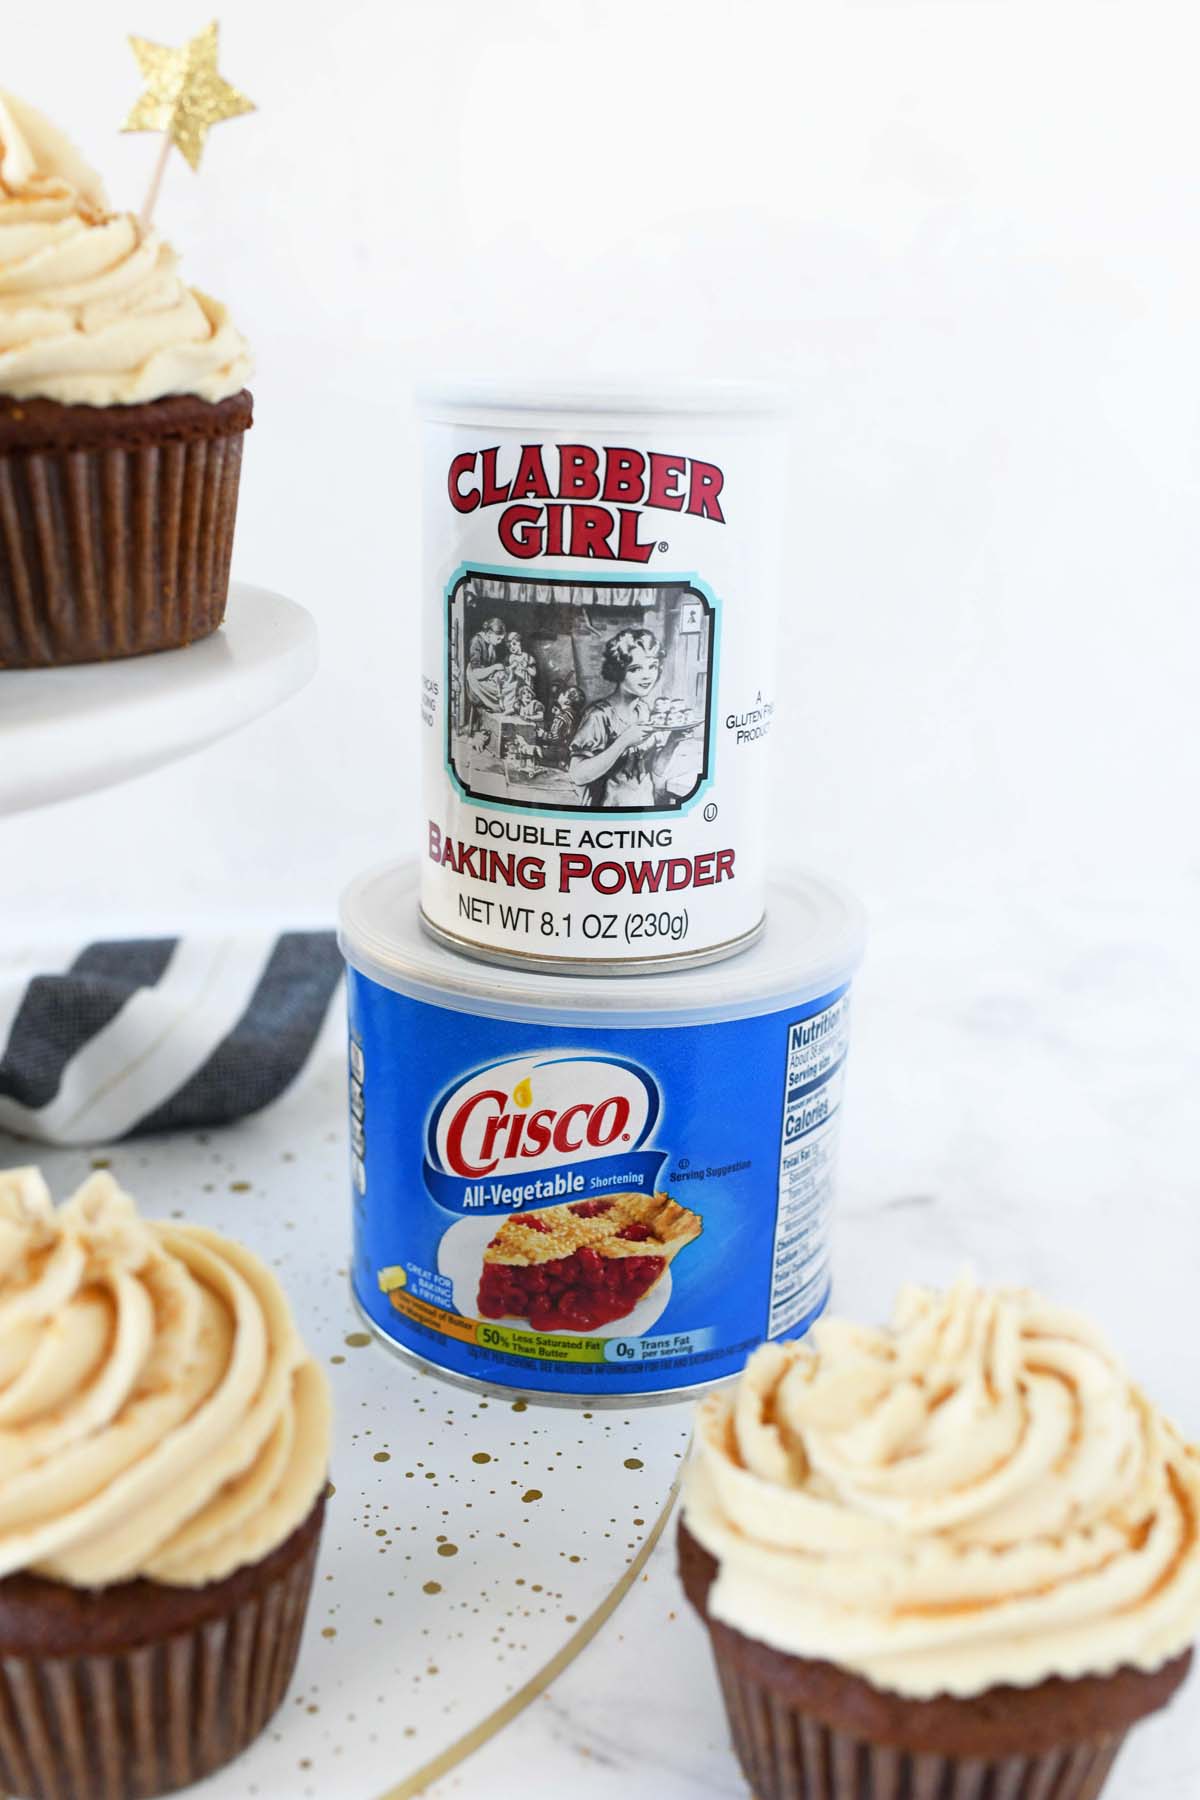 Clabber Girl and Crisco products near baked gingerbread cupcakes.